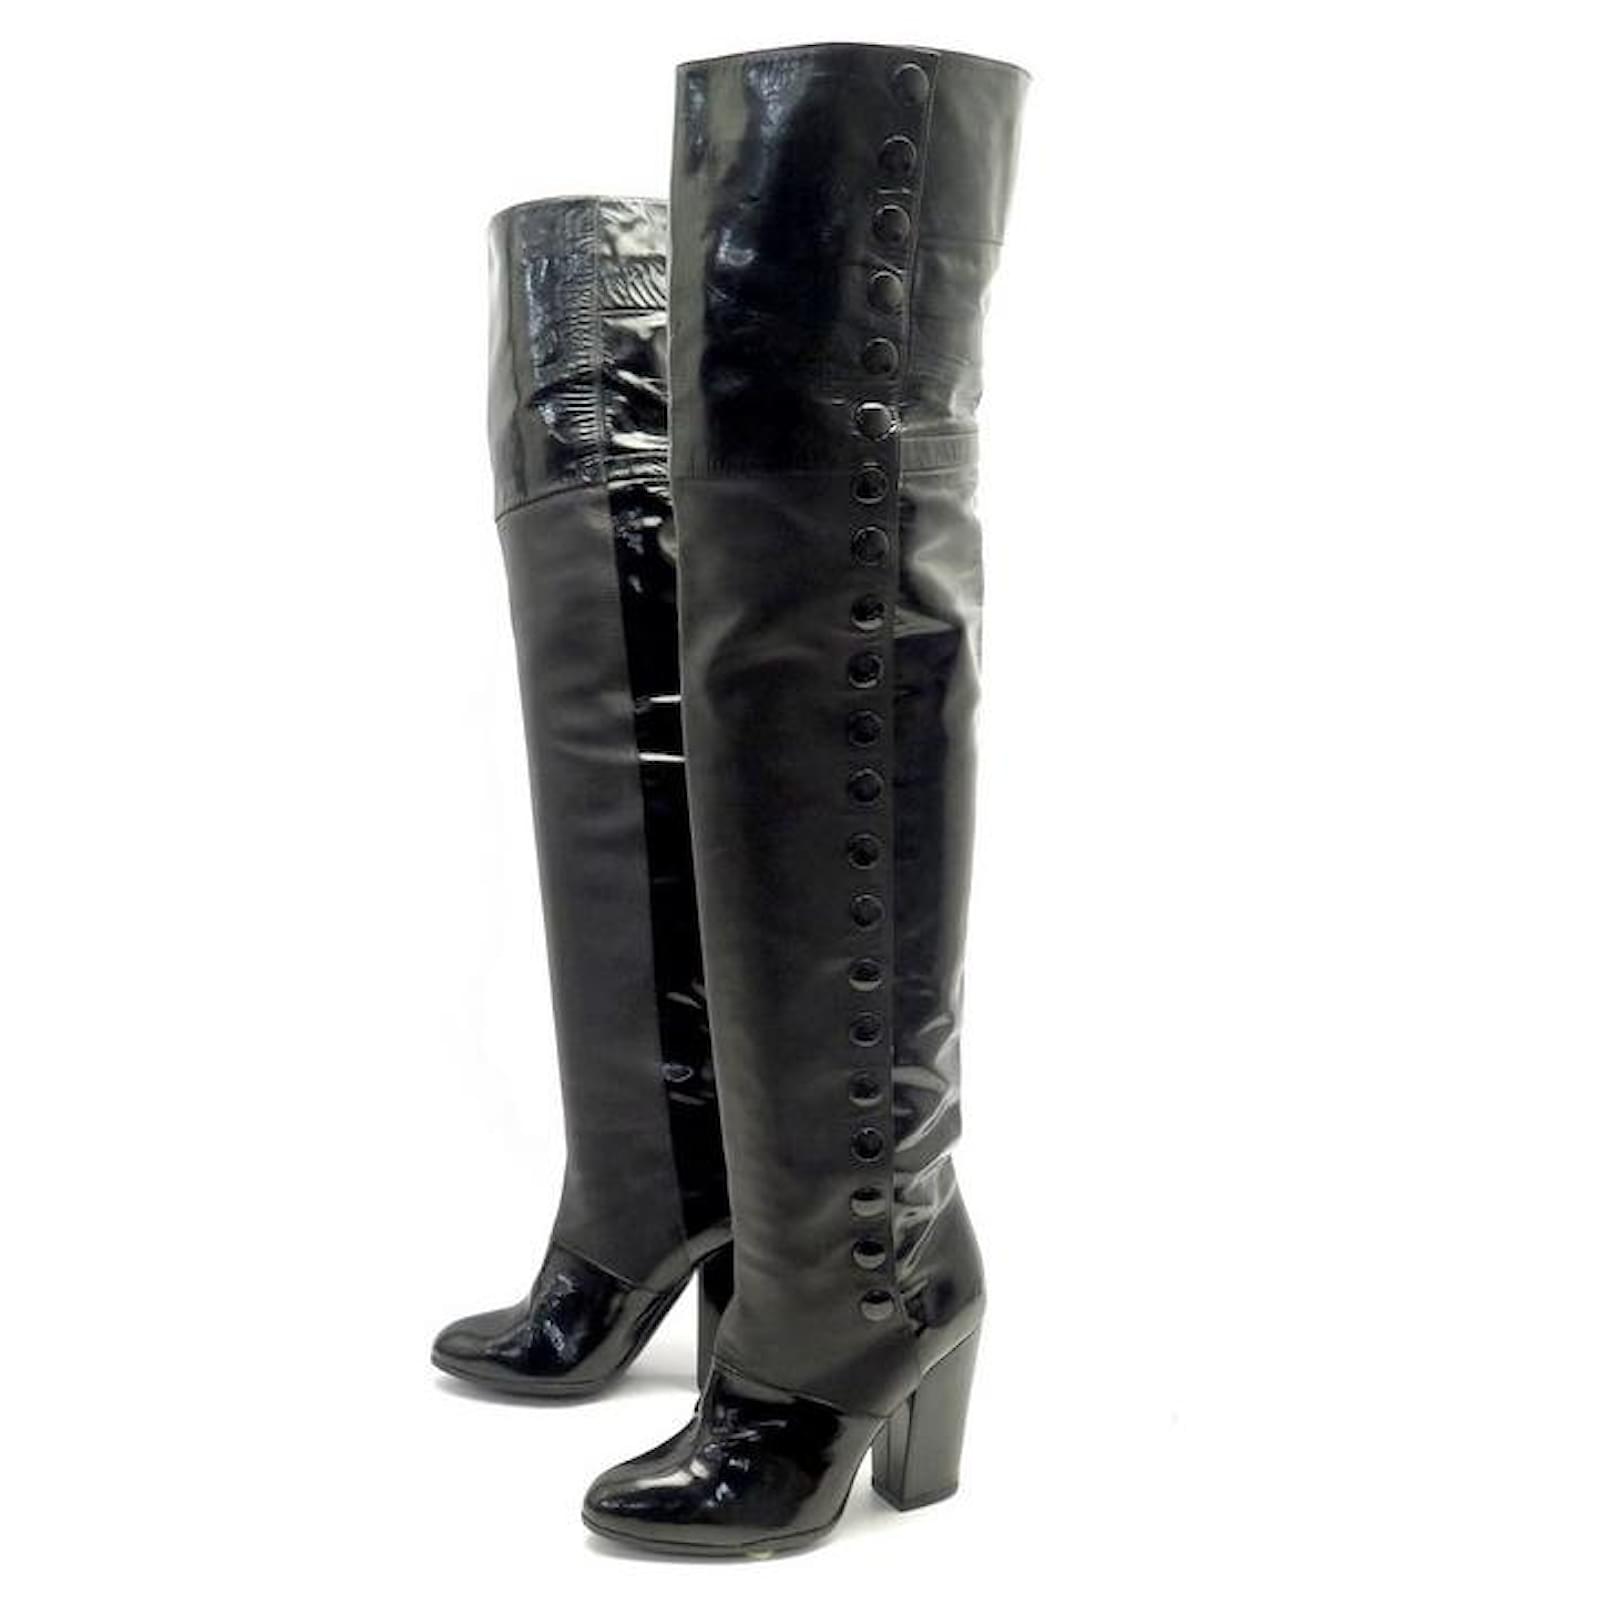 SHOES BOOTS CHANEL G26293 Thigh high boots 37 BLACK PATENT LEATHER